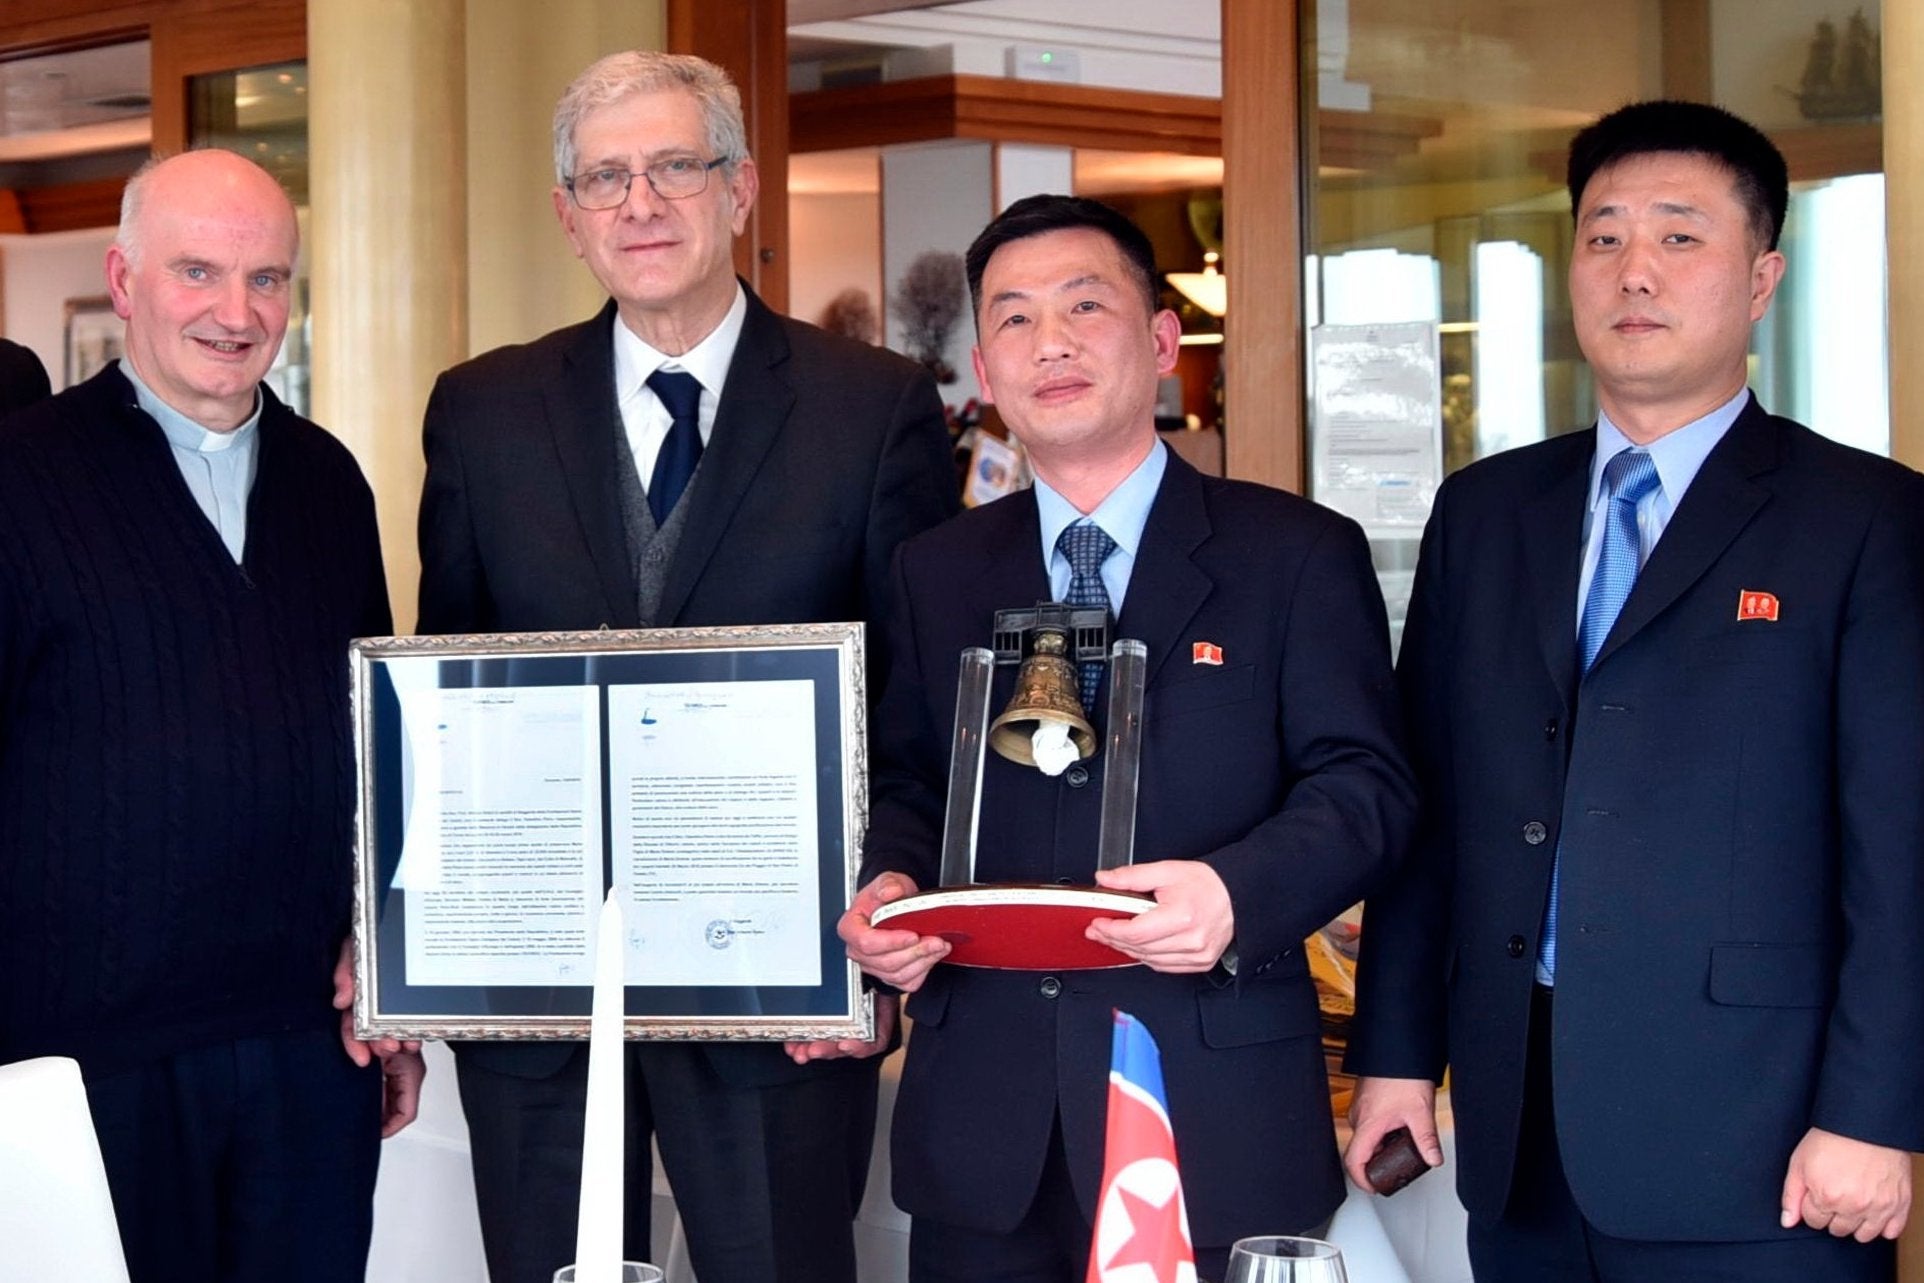 North Korea's acting ambassador to Italy Jo Song Gil (second right) has not been seen since early November and is believed to have gone into hiding wife his wife